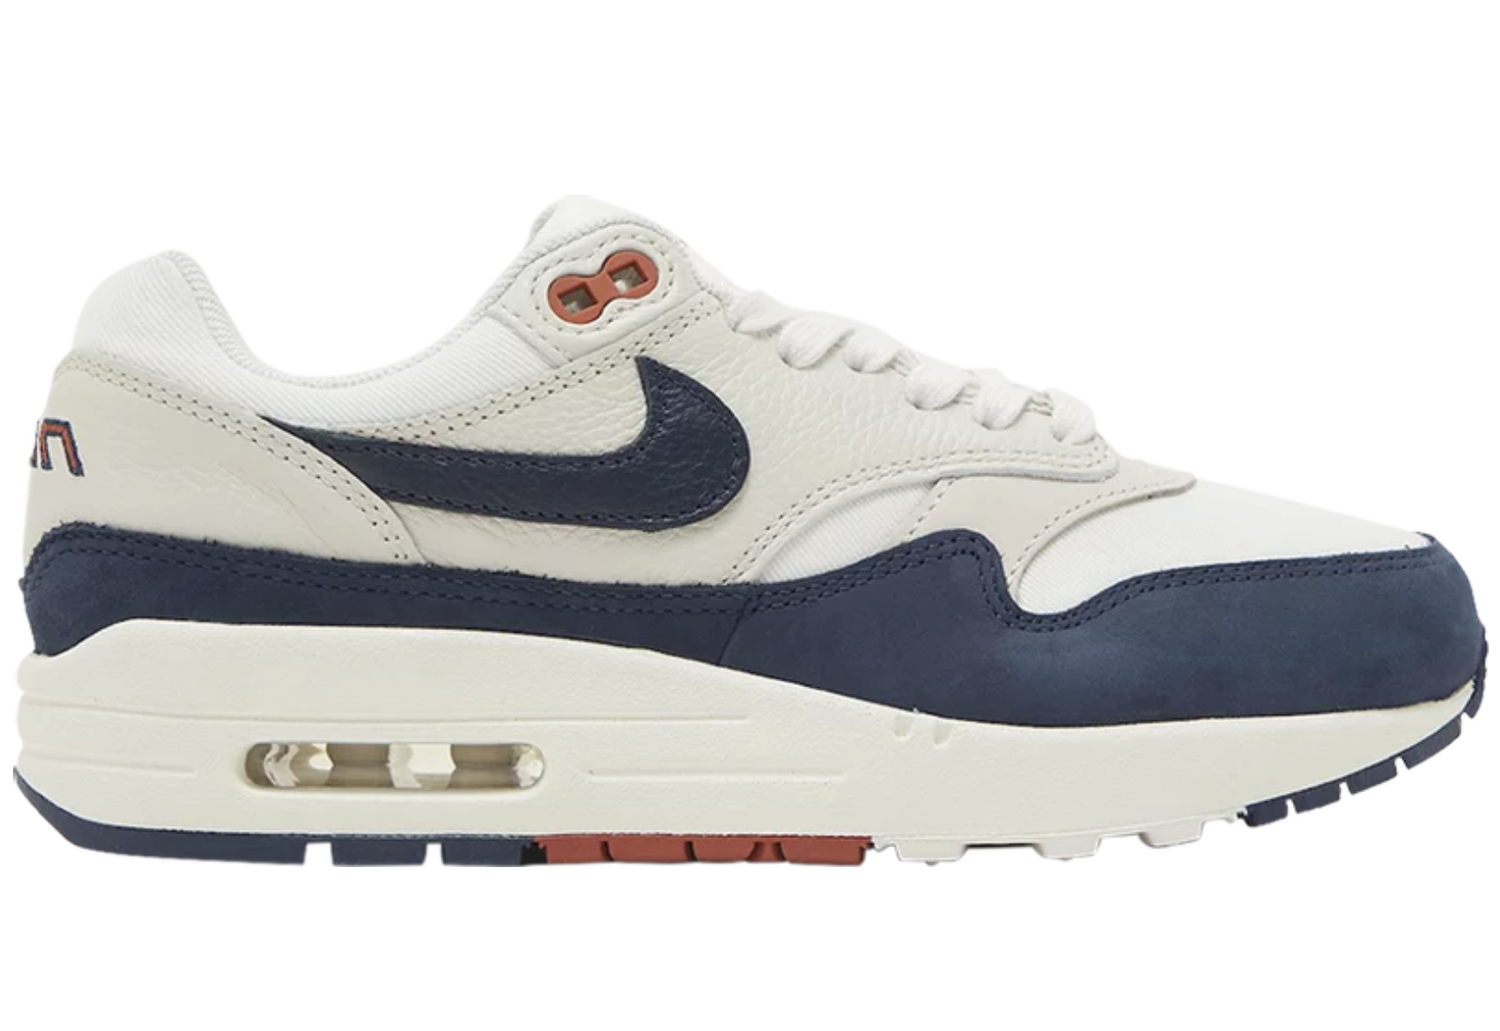 Now Available: Nike Air Max 1 LX (W) 